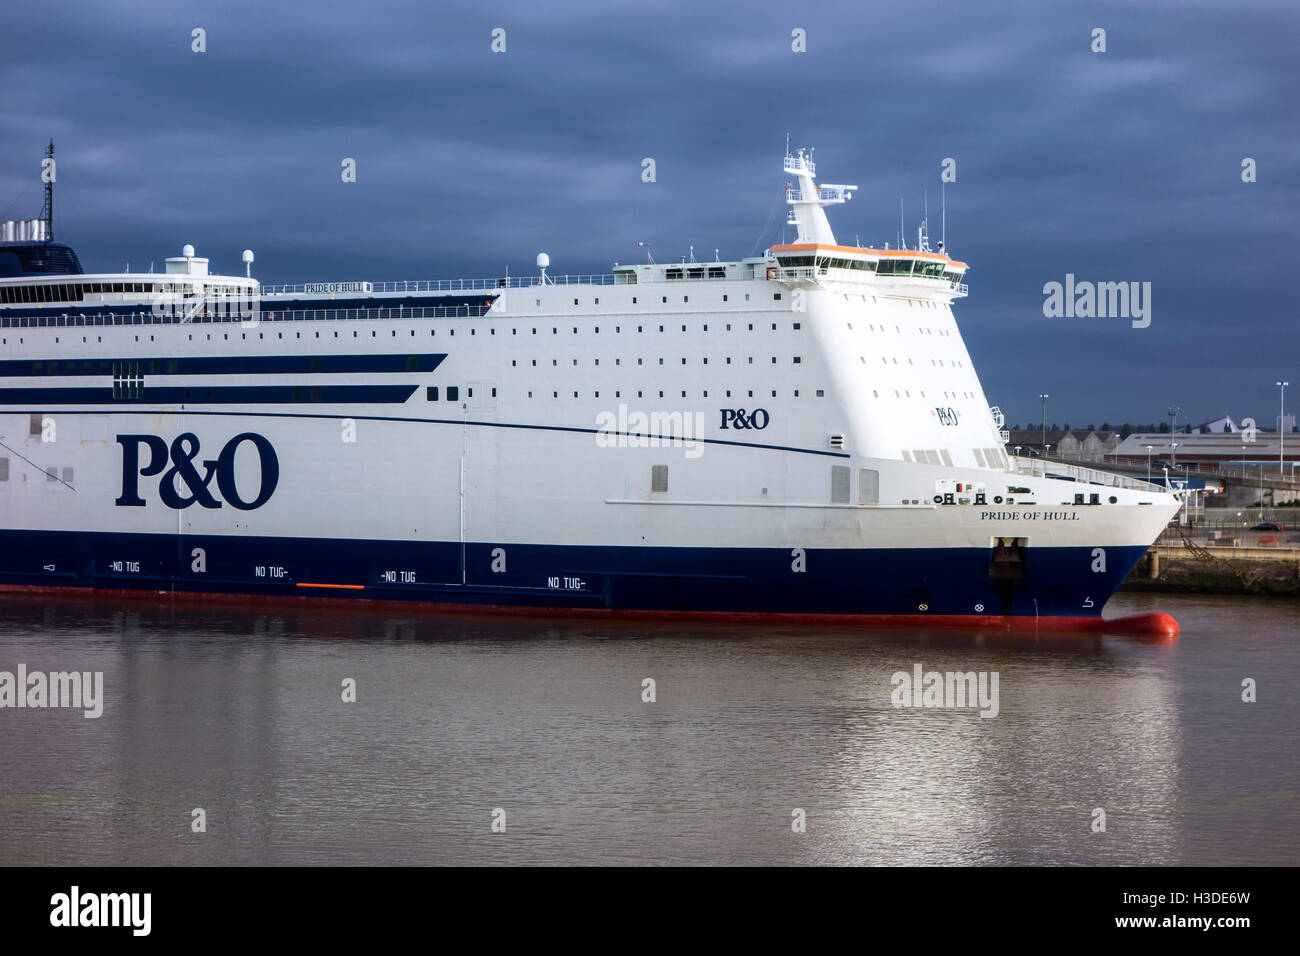 Mme Pride of Hull, P&O North Sea Ferries passagers et fret des navire dans le port de Kingston Upon Hull, England, UK Banque D'Images